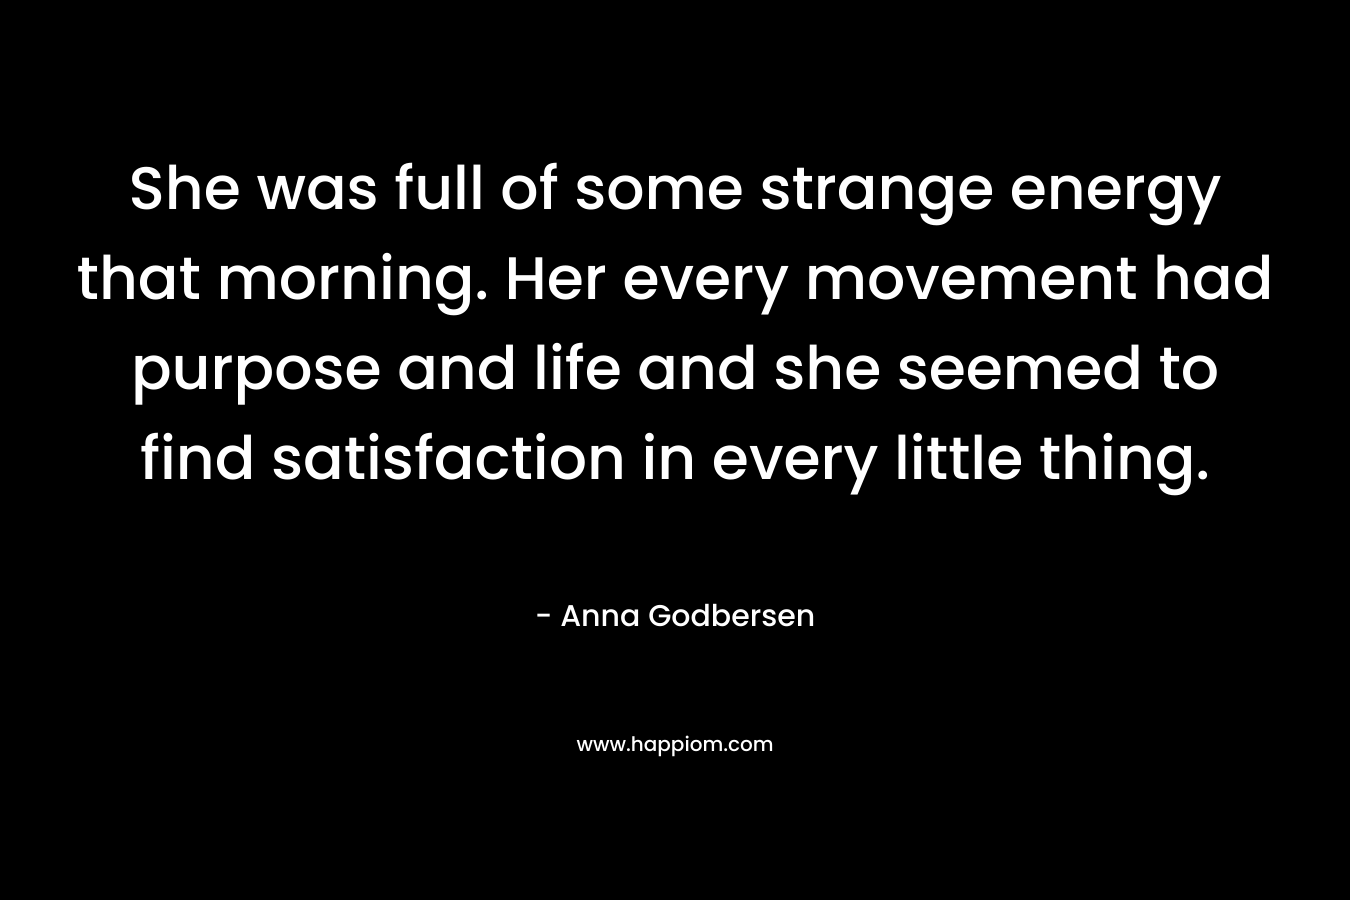 She was full of some strange energy that morning. Her every movement had purpose and life and she seemed to find satisfaction in every little thing. – Anna Godbersen